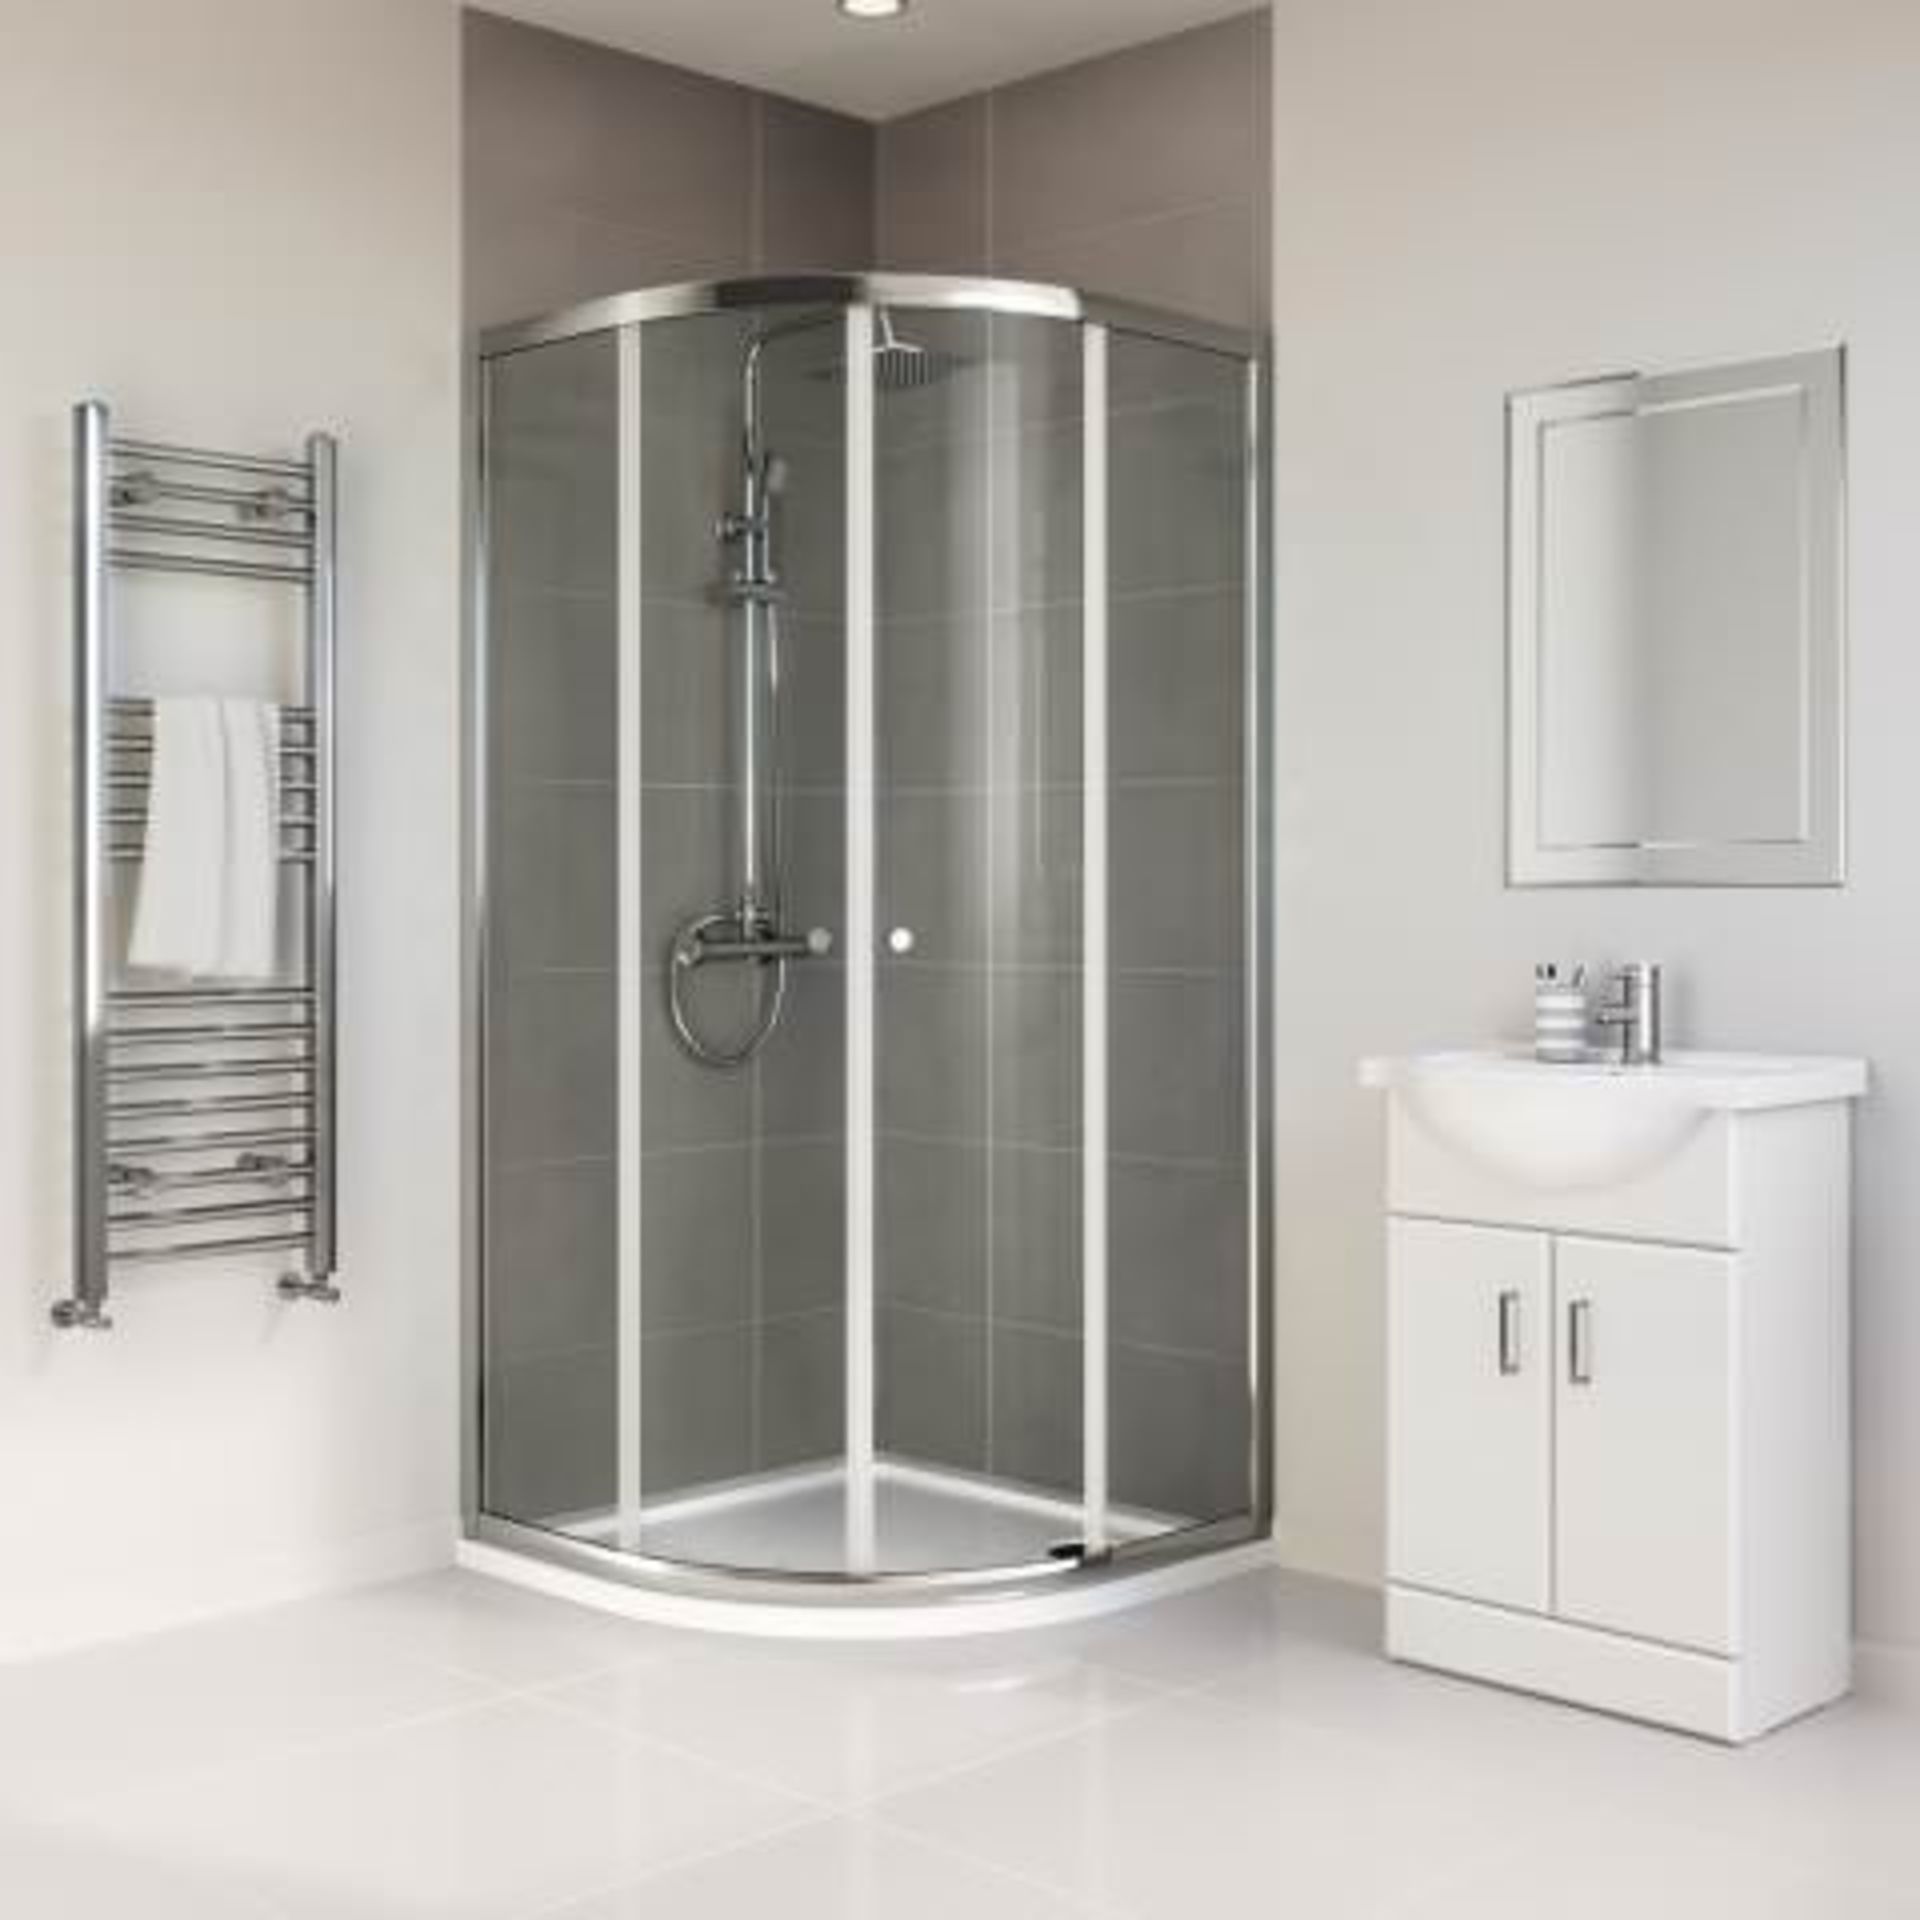 (W142) 900x900mm - Elements Quadrant Shower Enclosure. RRP £229.99. Budget Solution Our entry - Image 3 of 4